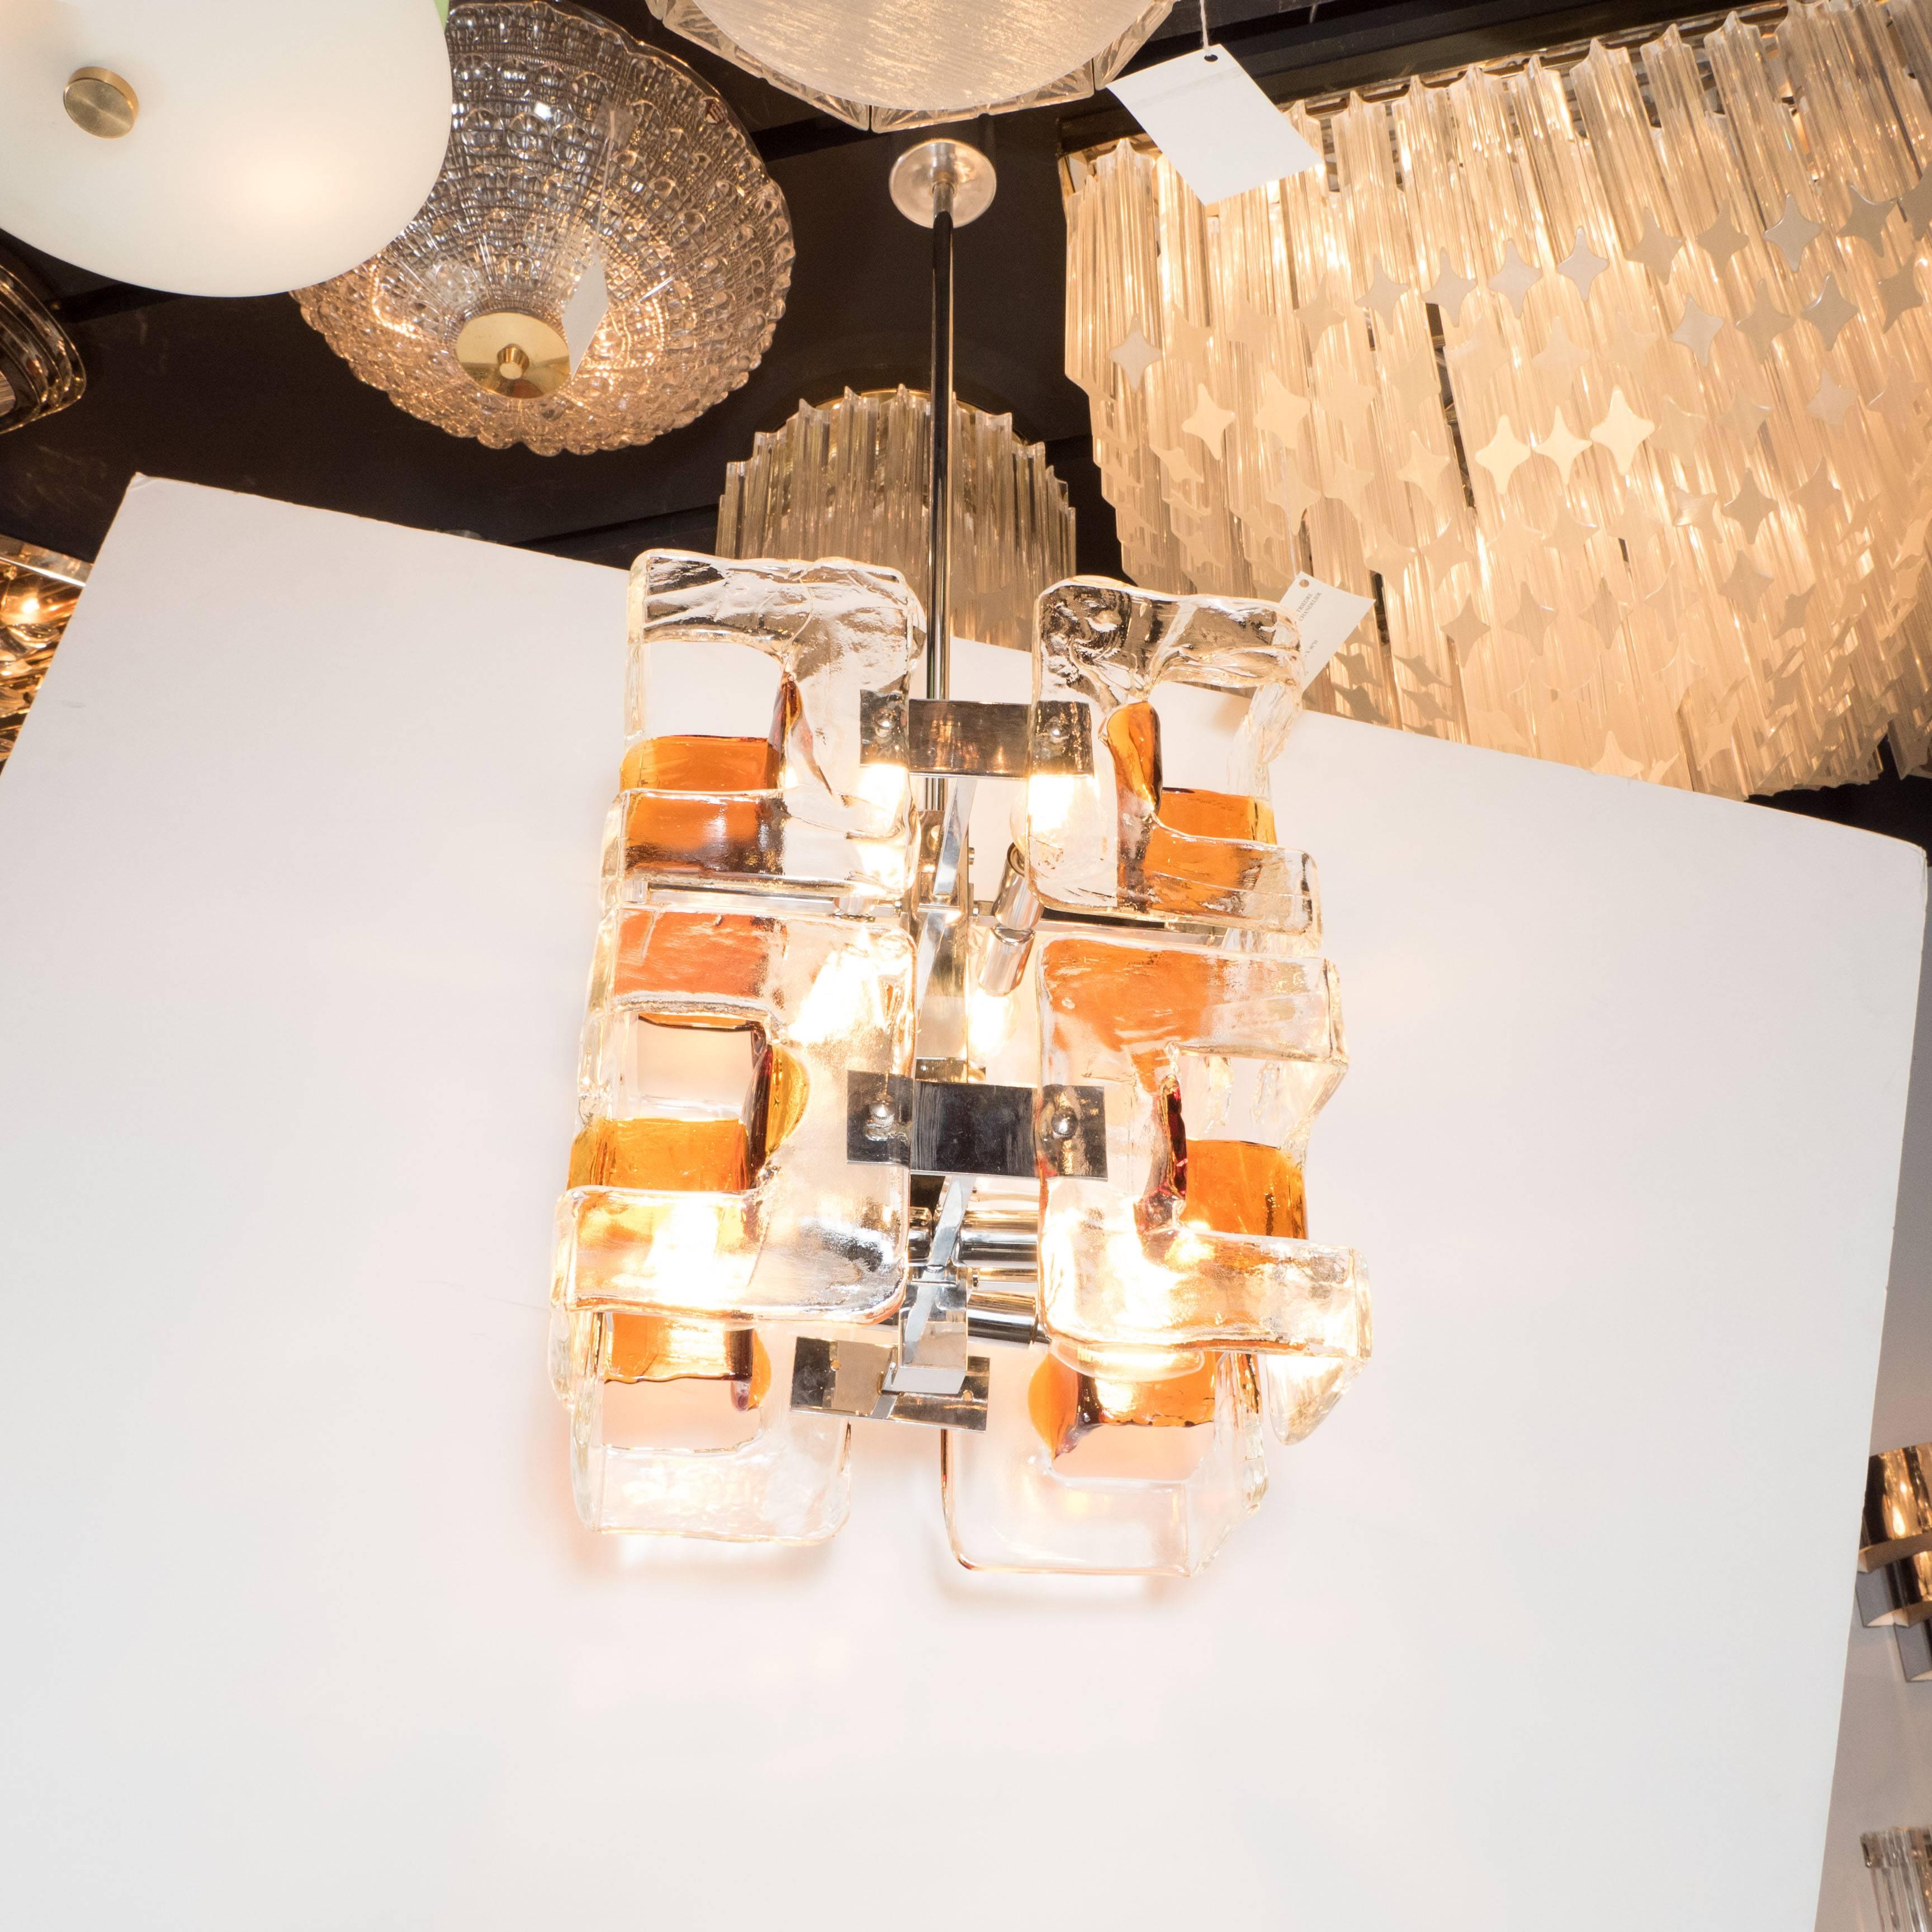 This dramatic and elegant Mid Century Modern chandelier was realized in Murano, Italy- the island off the coast of Venice renowned for centuries for its superlative glass production- by the fabled lighting atelier Mazzega circa 1970. It offers a